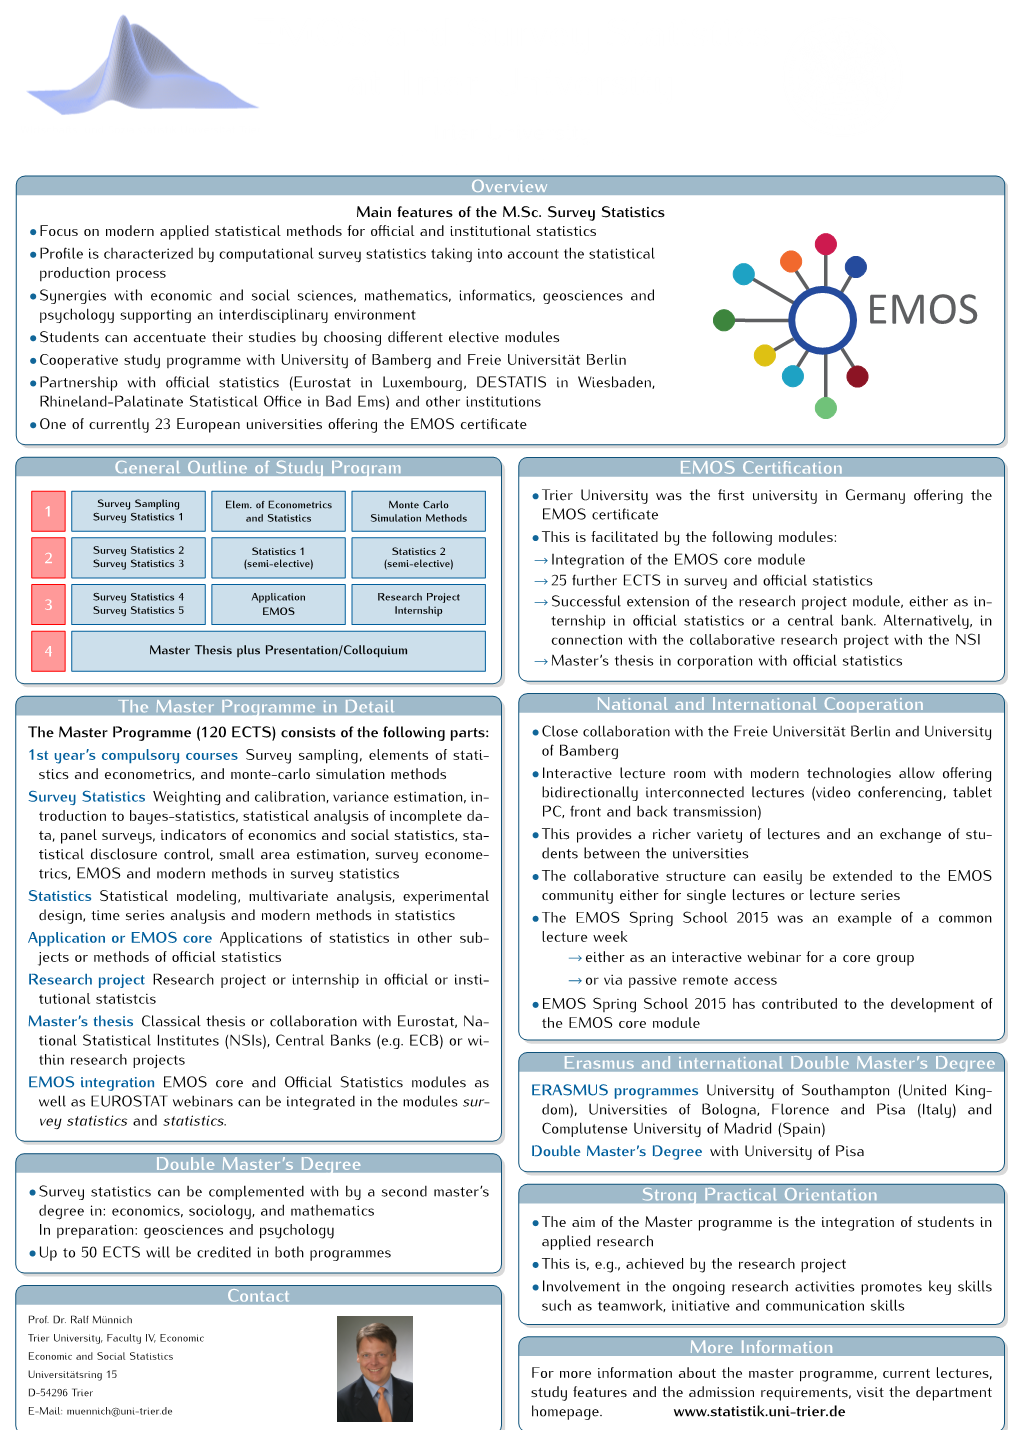 EMOS and Survey Statistics at Trier University Trier University Overview Main Features of the M.Sc